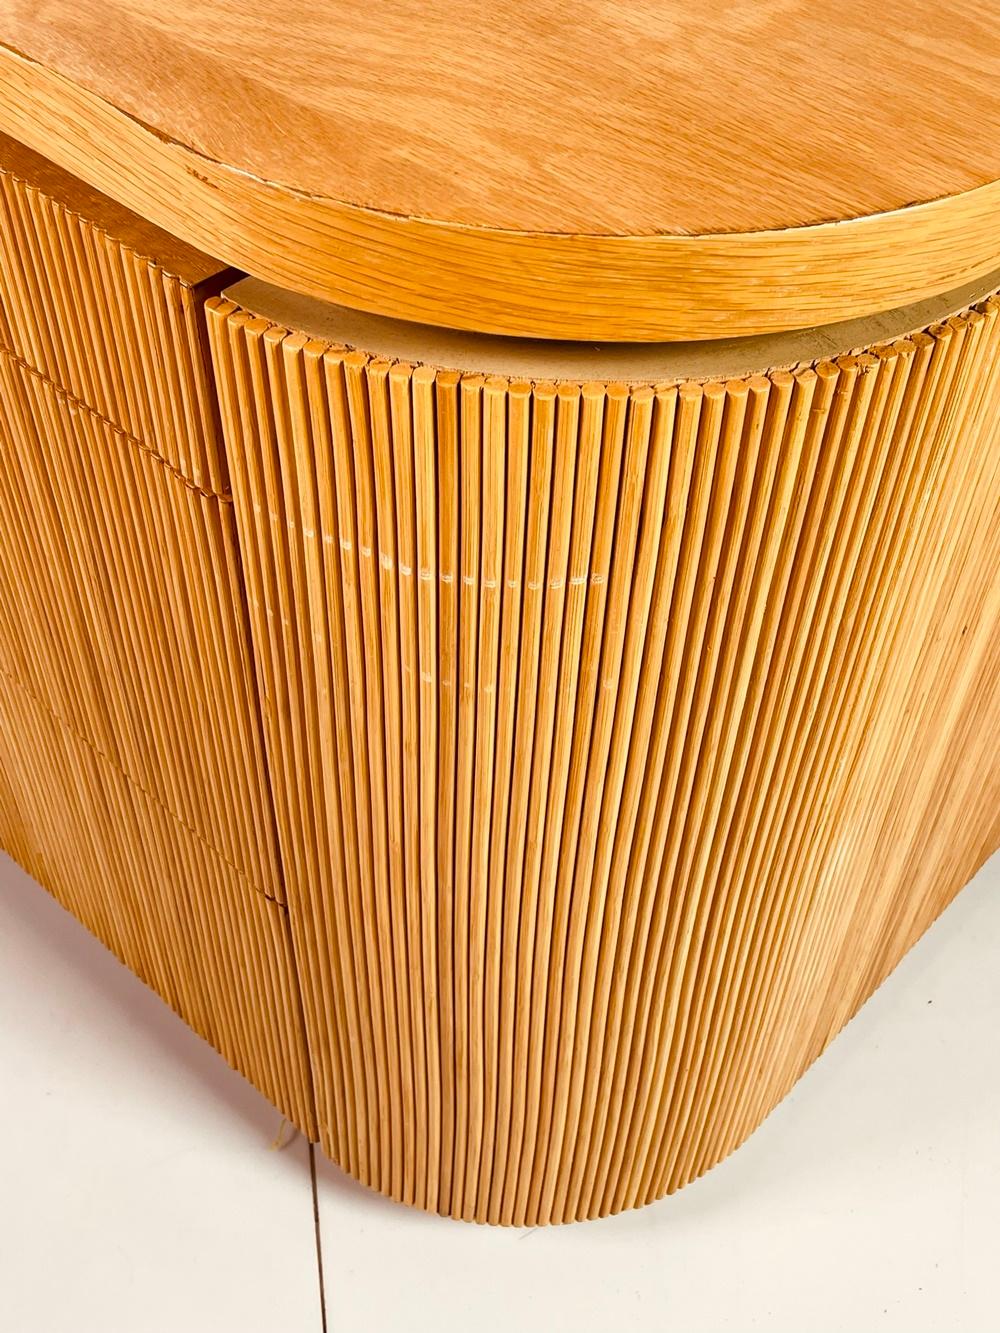 Pencil Reed Executive Desk in the Style of Karl Springer, USA 1970's For Sale 1